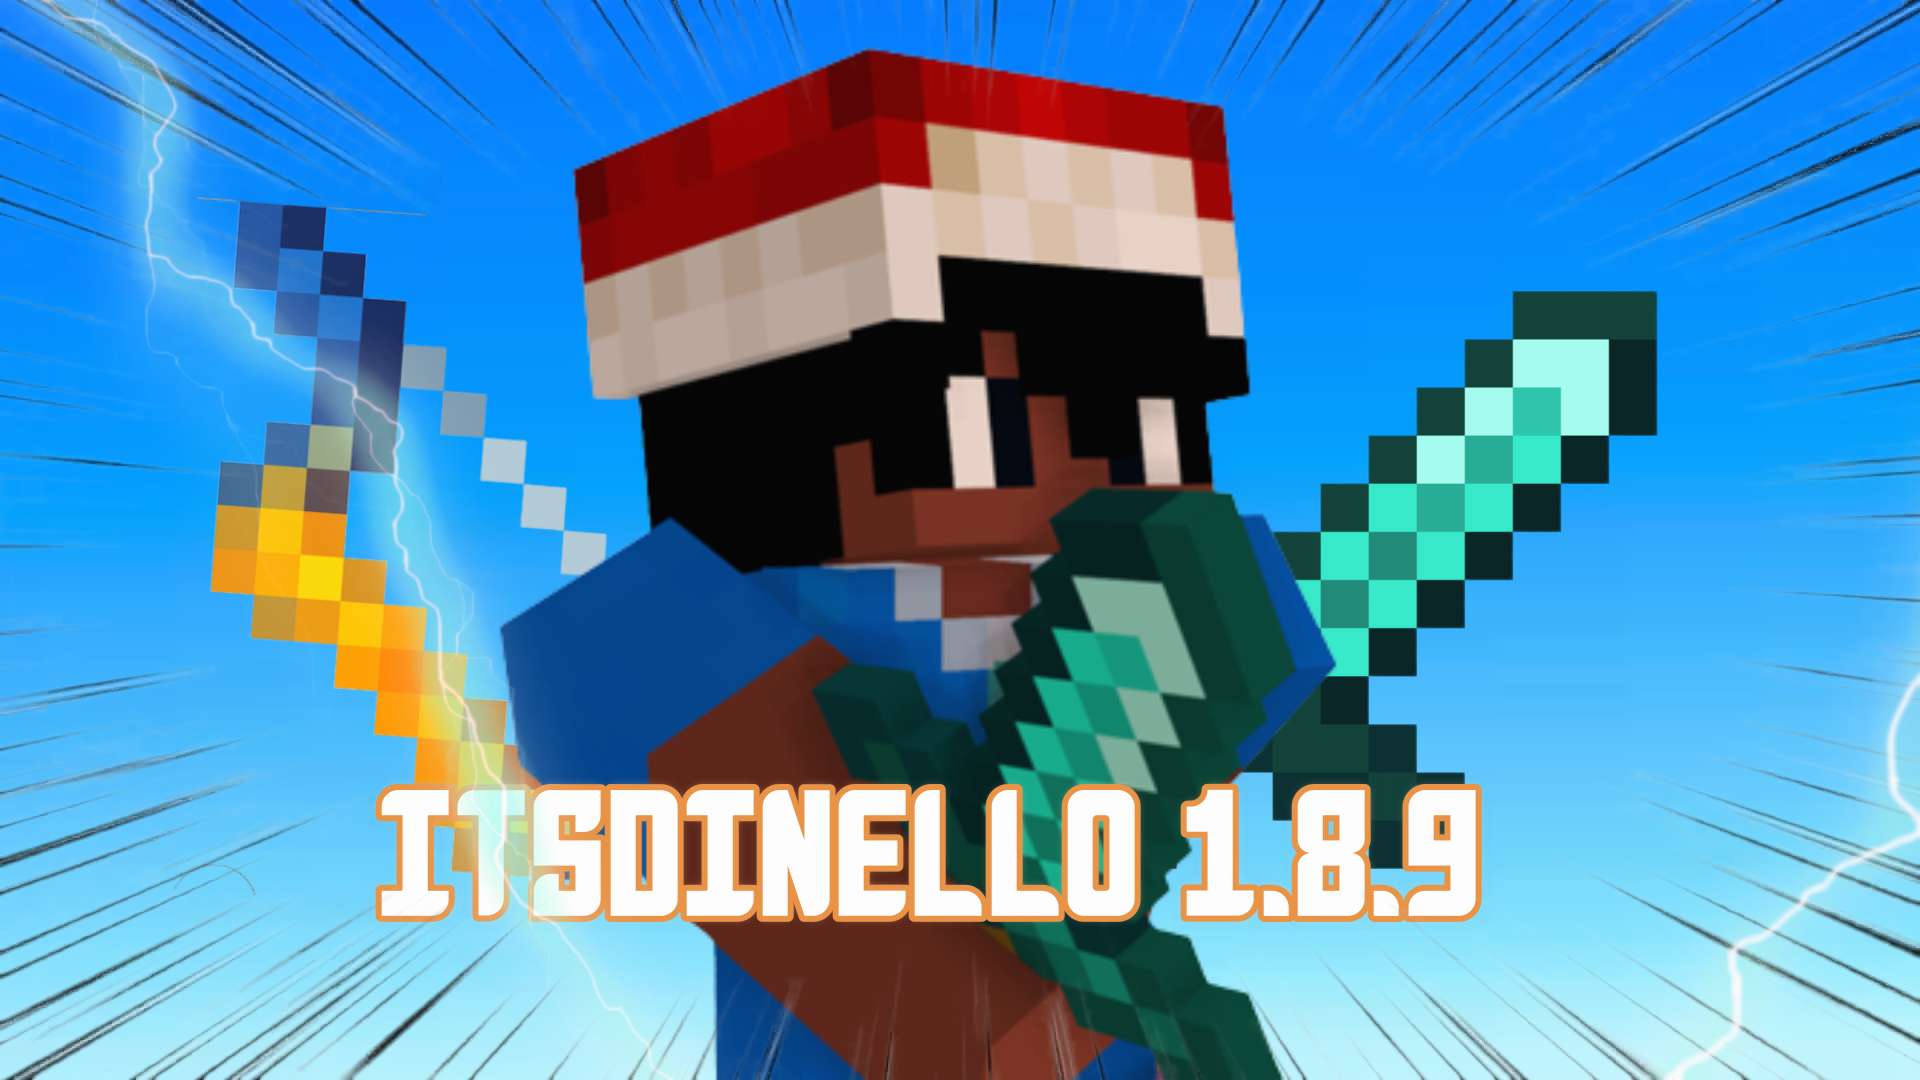 Gallery Banner for ItsDinello 1.8.9 5k SPECIALE on PvPRP